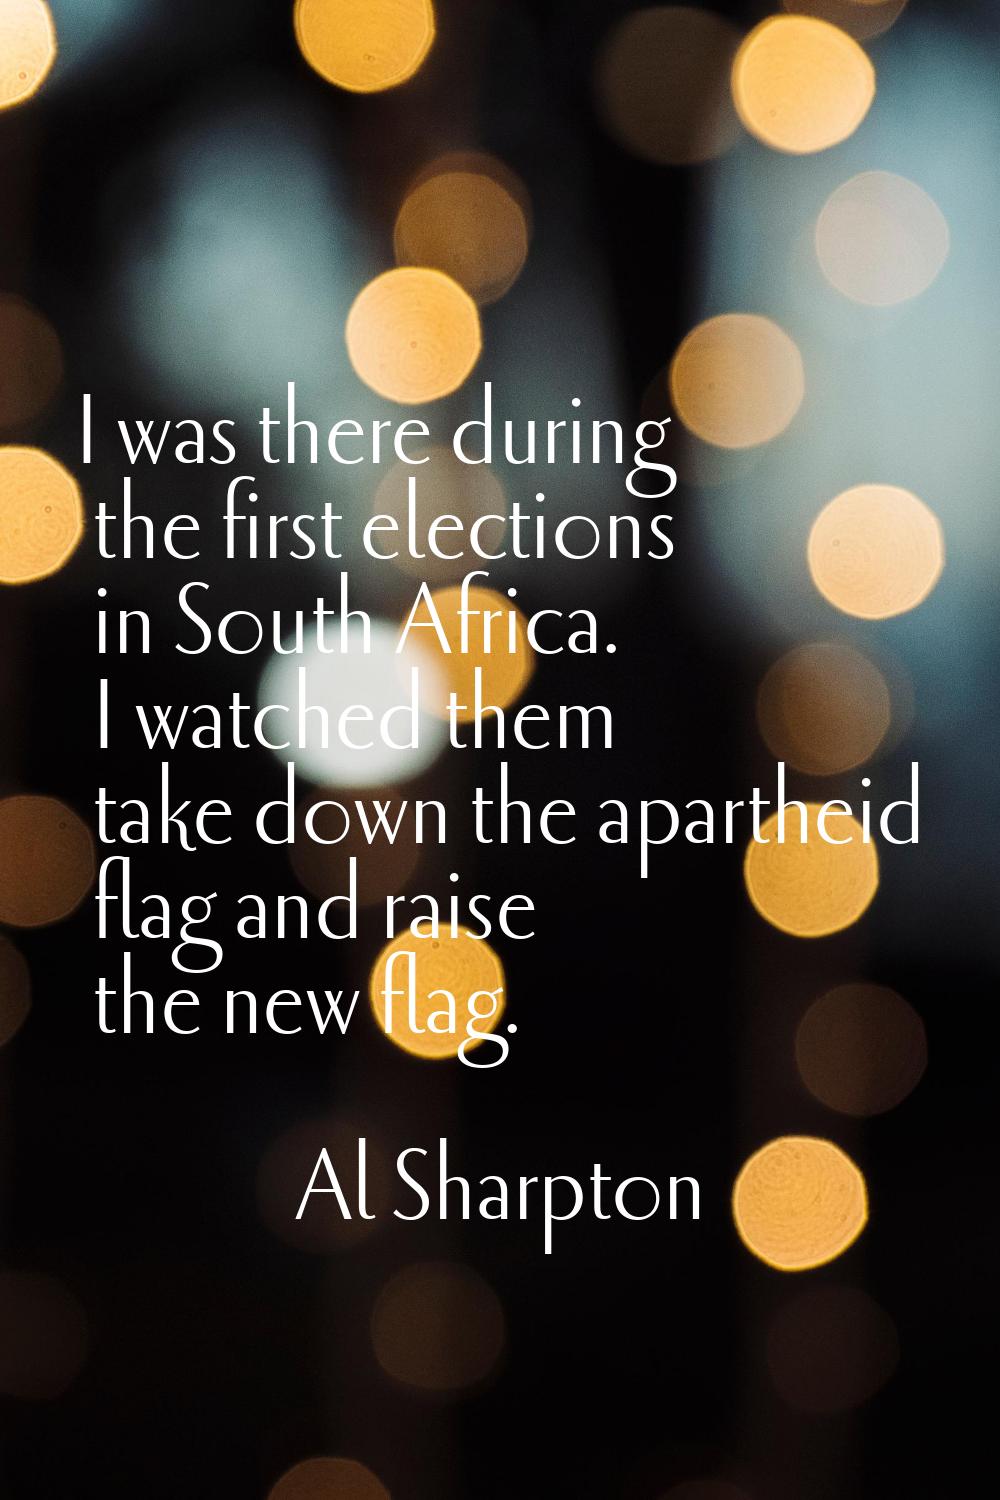 I was there during the first elections in South Africa. I watched them take down the apartheid flag